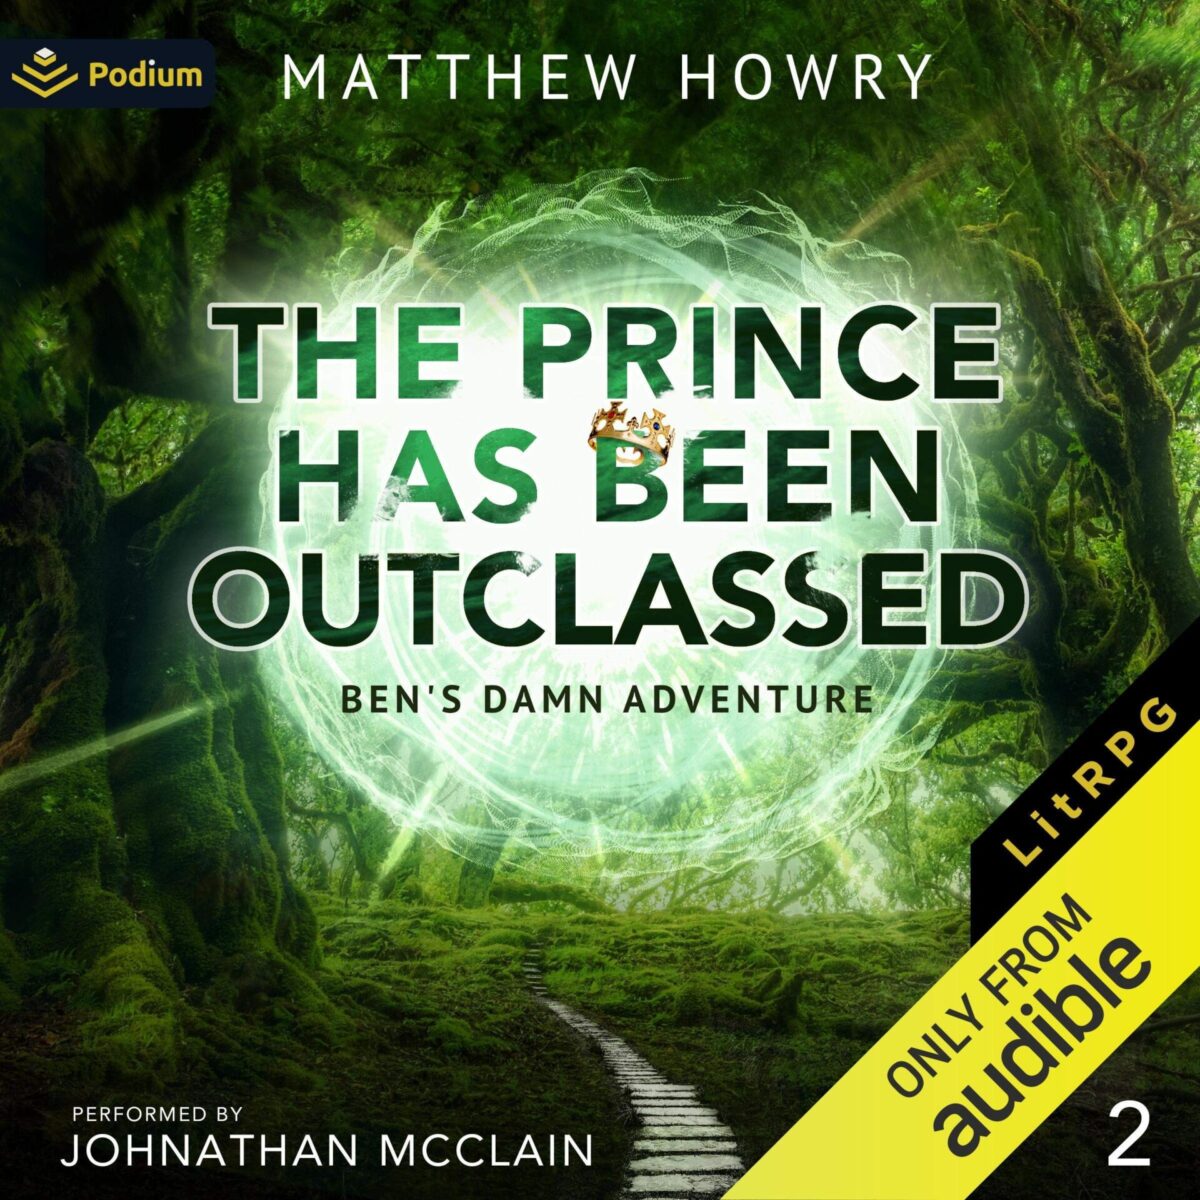 The Prince Has Been Outclassed – The Audiobook Review